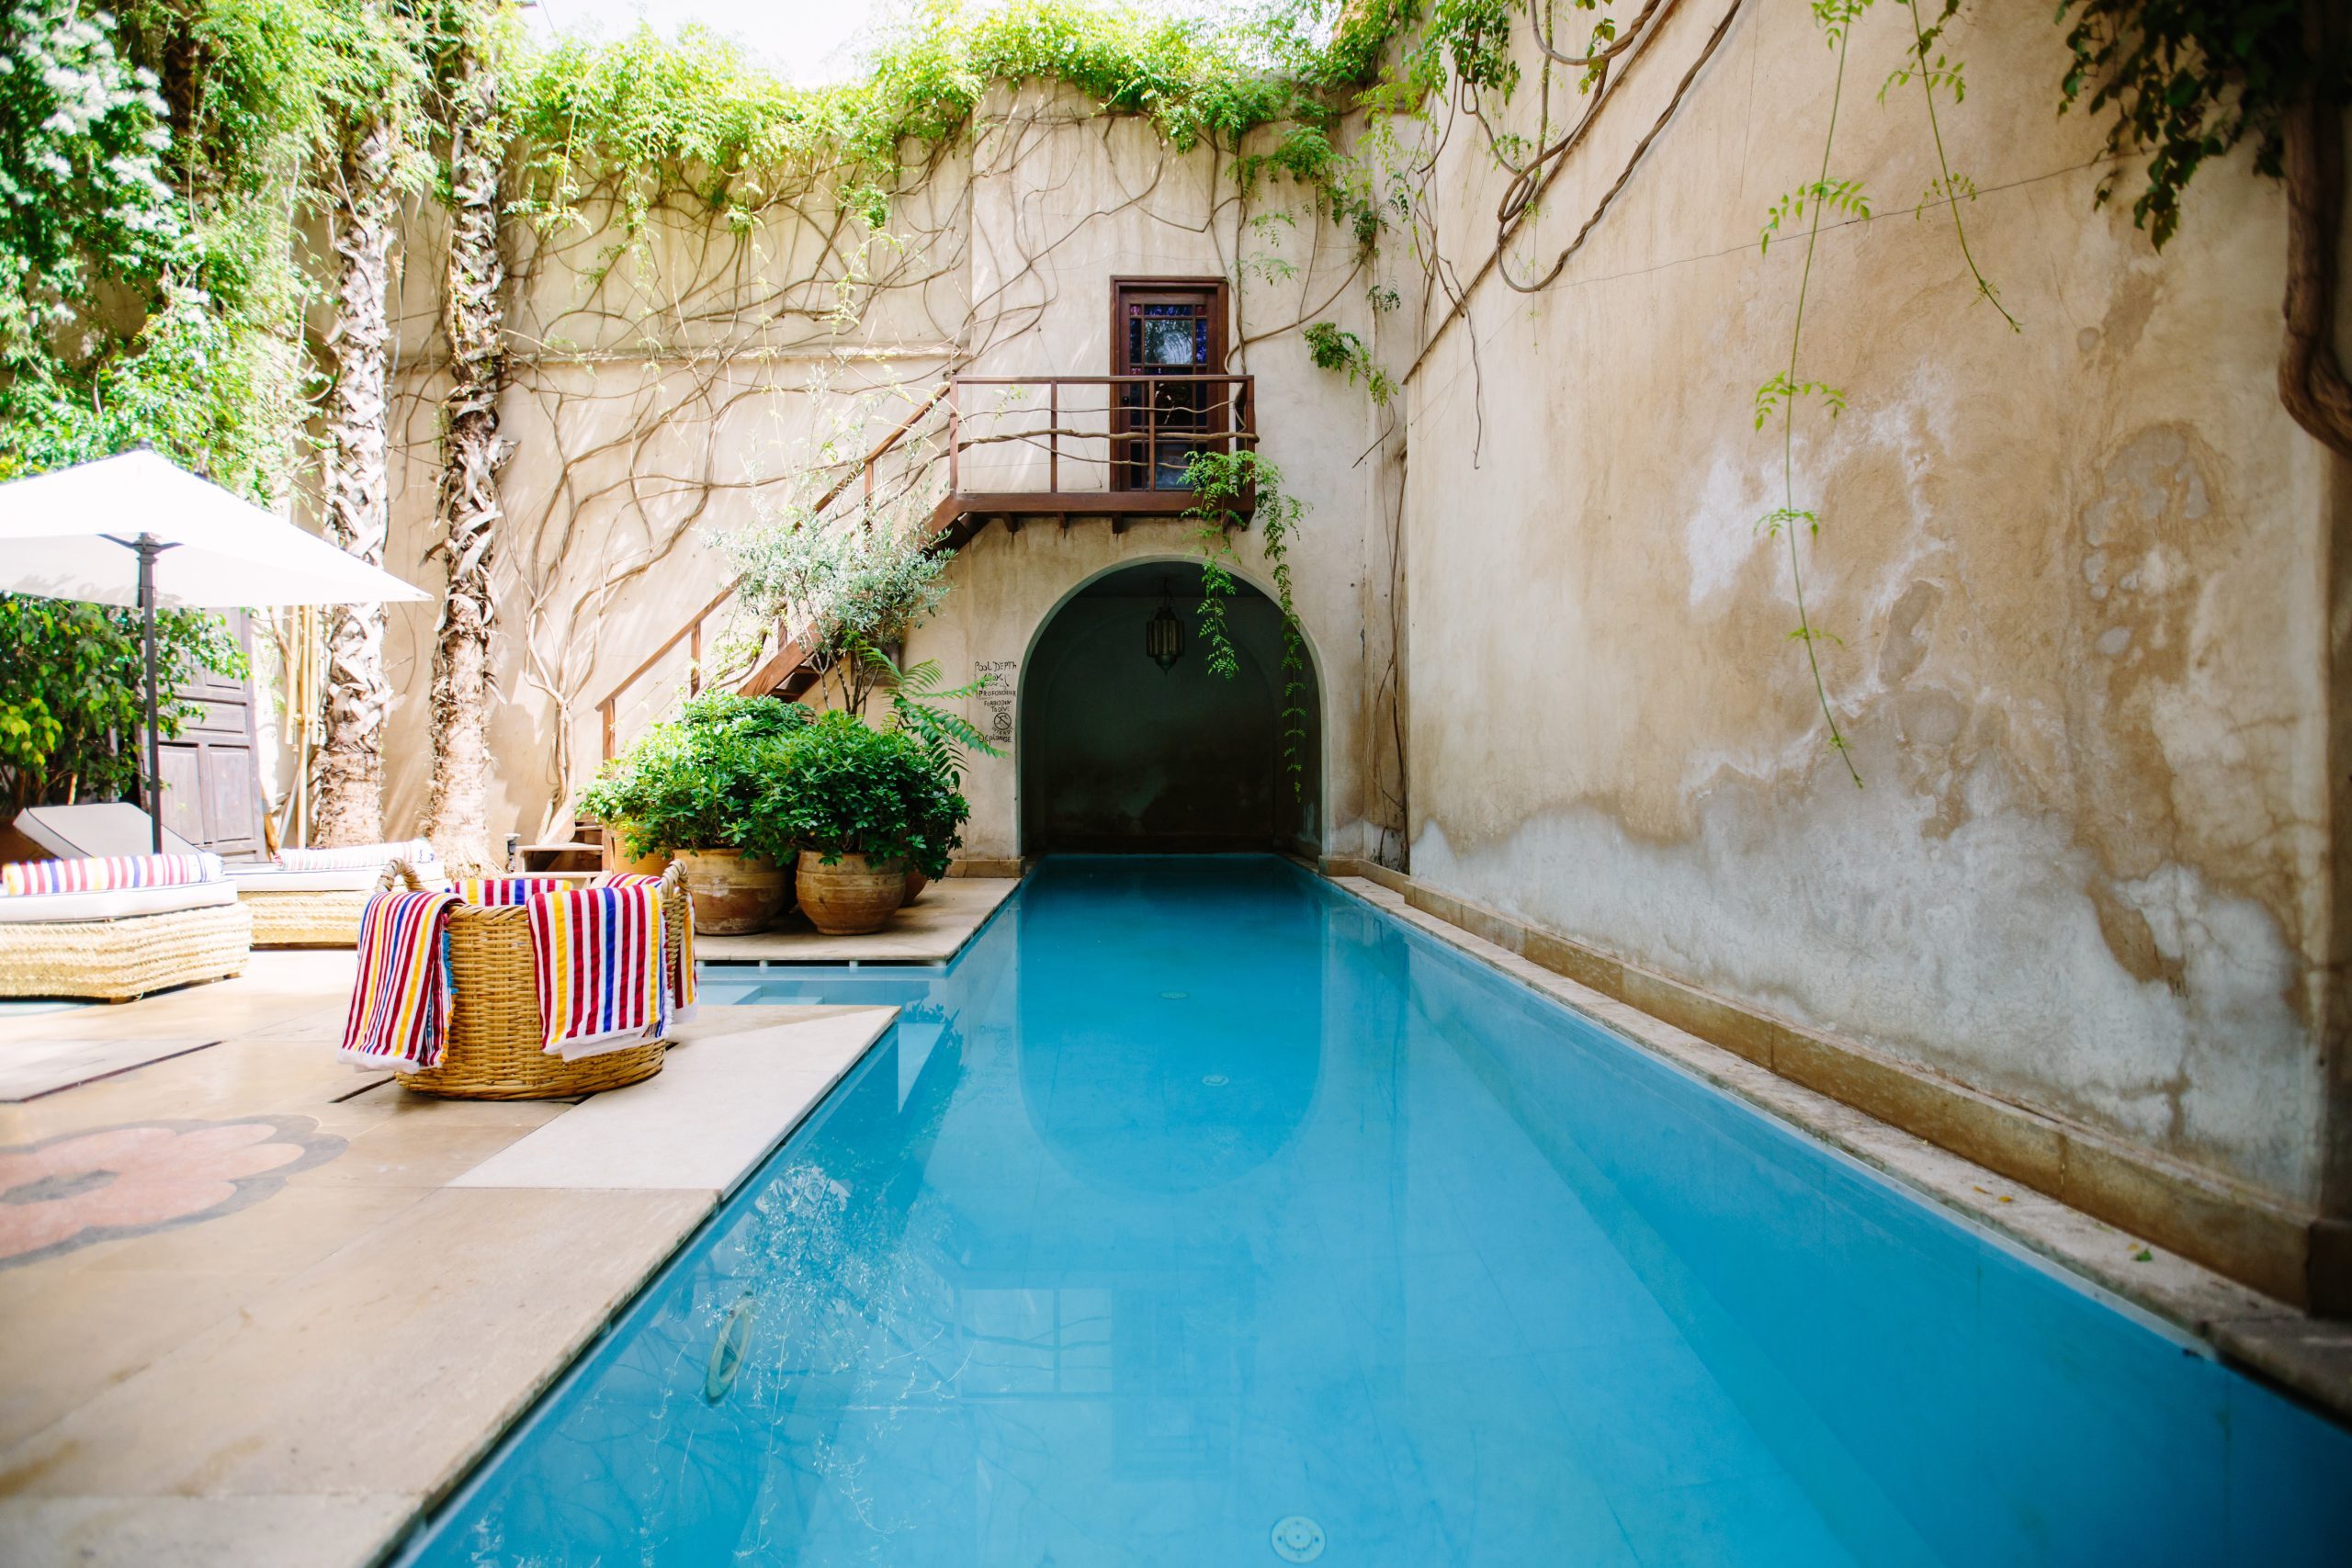 Image of pool in boutique hotel, Marrakesh, Morocco